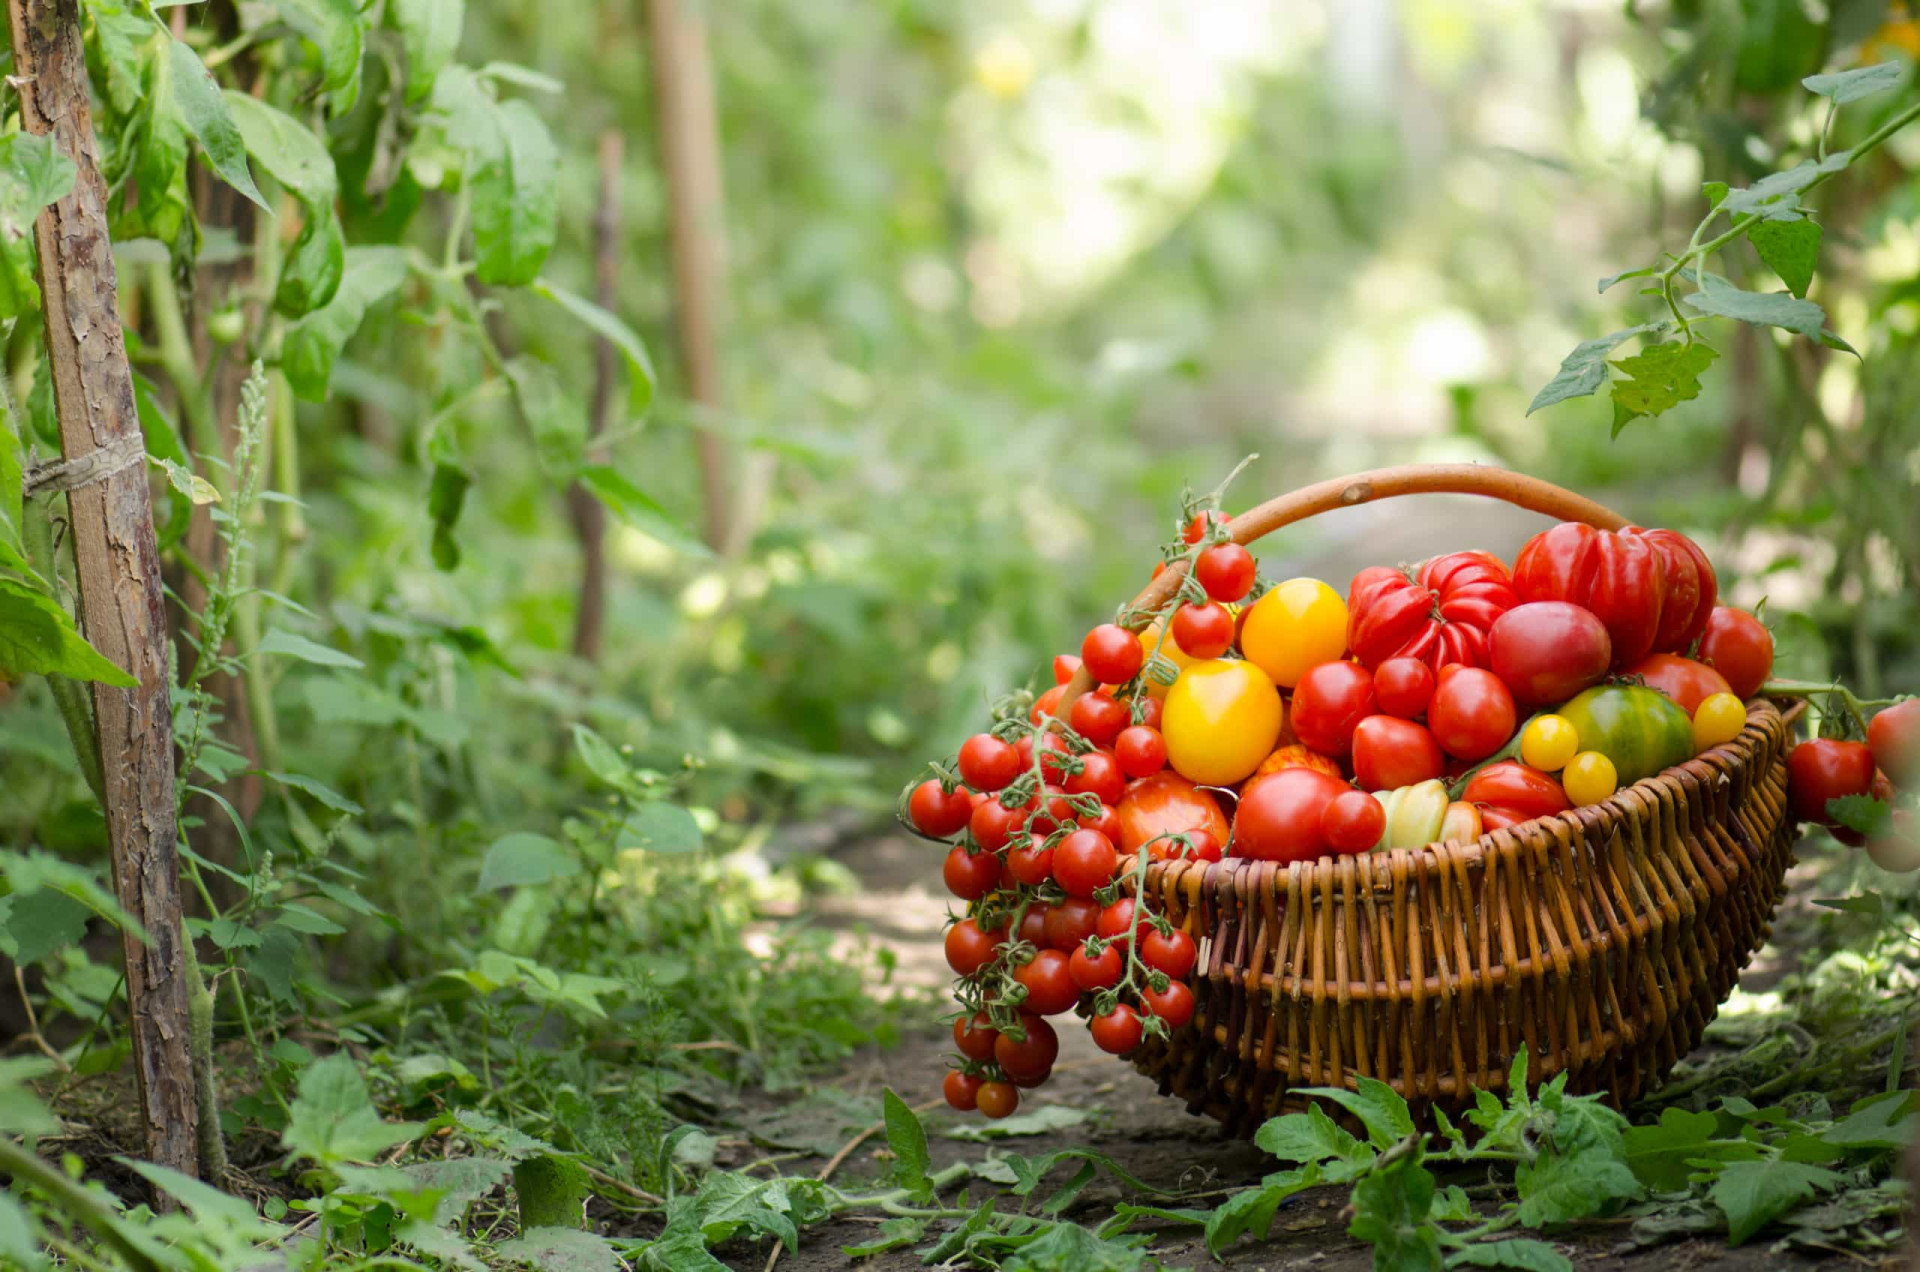 <p>New gardeners often forget that each plant type has a huge number of different varieties to choose from. Watery tomatoes or bland carrots can be a real disappointment, so it's important to do your research and choose seeds that come recommended by experienced gardeners.</p><p><a href="https://www.msn.com/en-us/community/channel/vid-7xx8mnucu55yw63we9va2gwr7uihbxwc68fxqp25x6tg4ftibpra?cvid=94631541bc0f4f89bfd59158d696ad7e">Follow us and access great exclusive content every day</a></p>